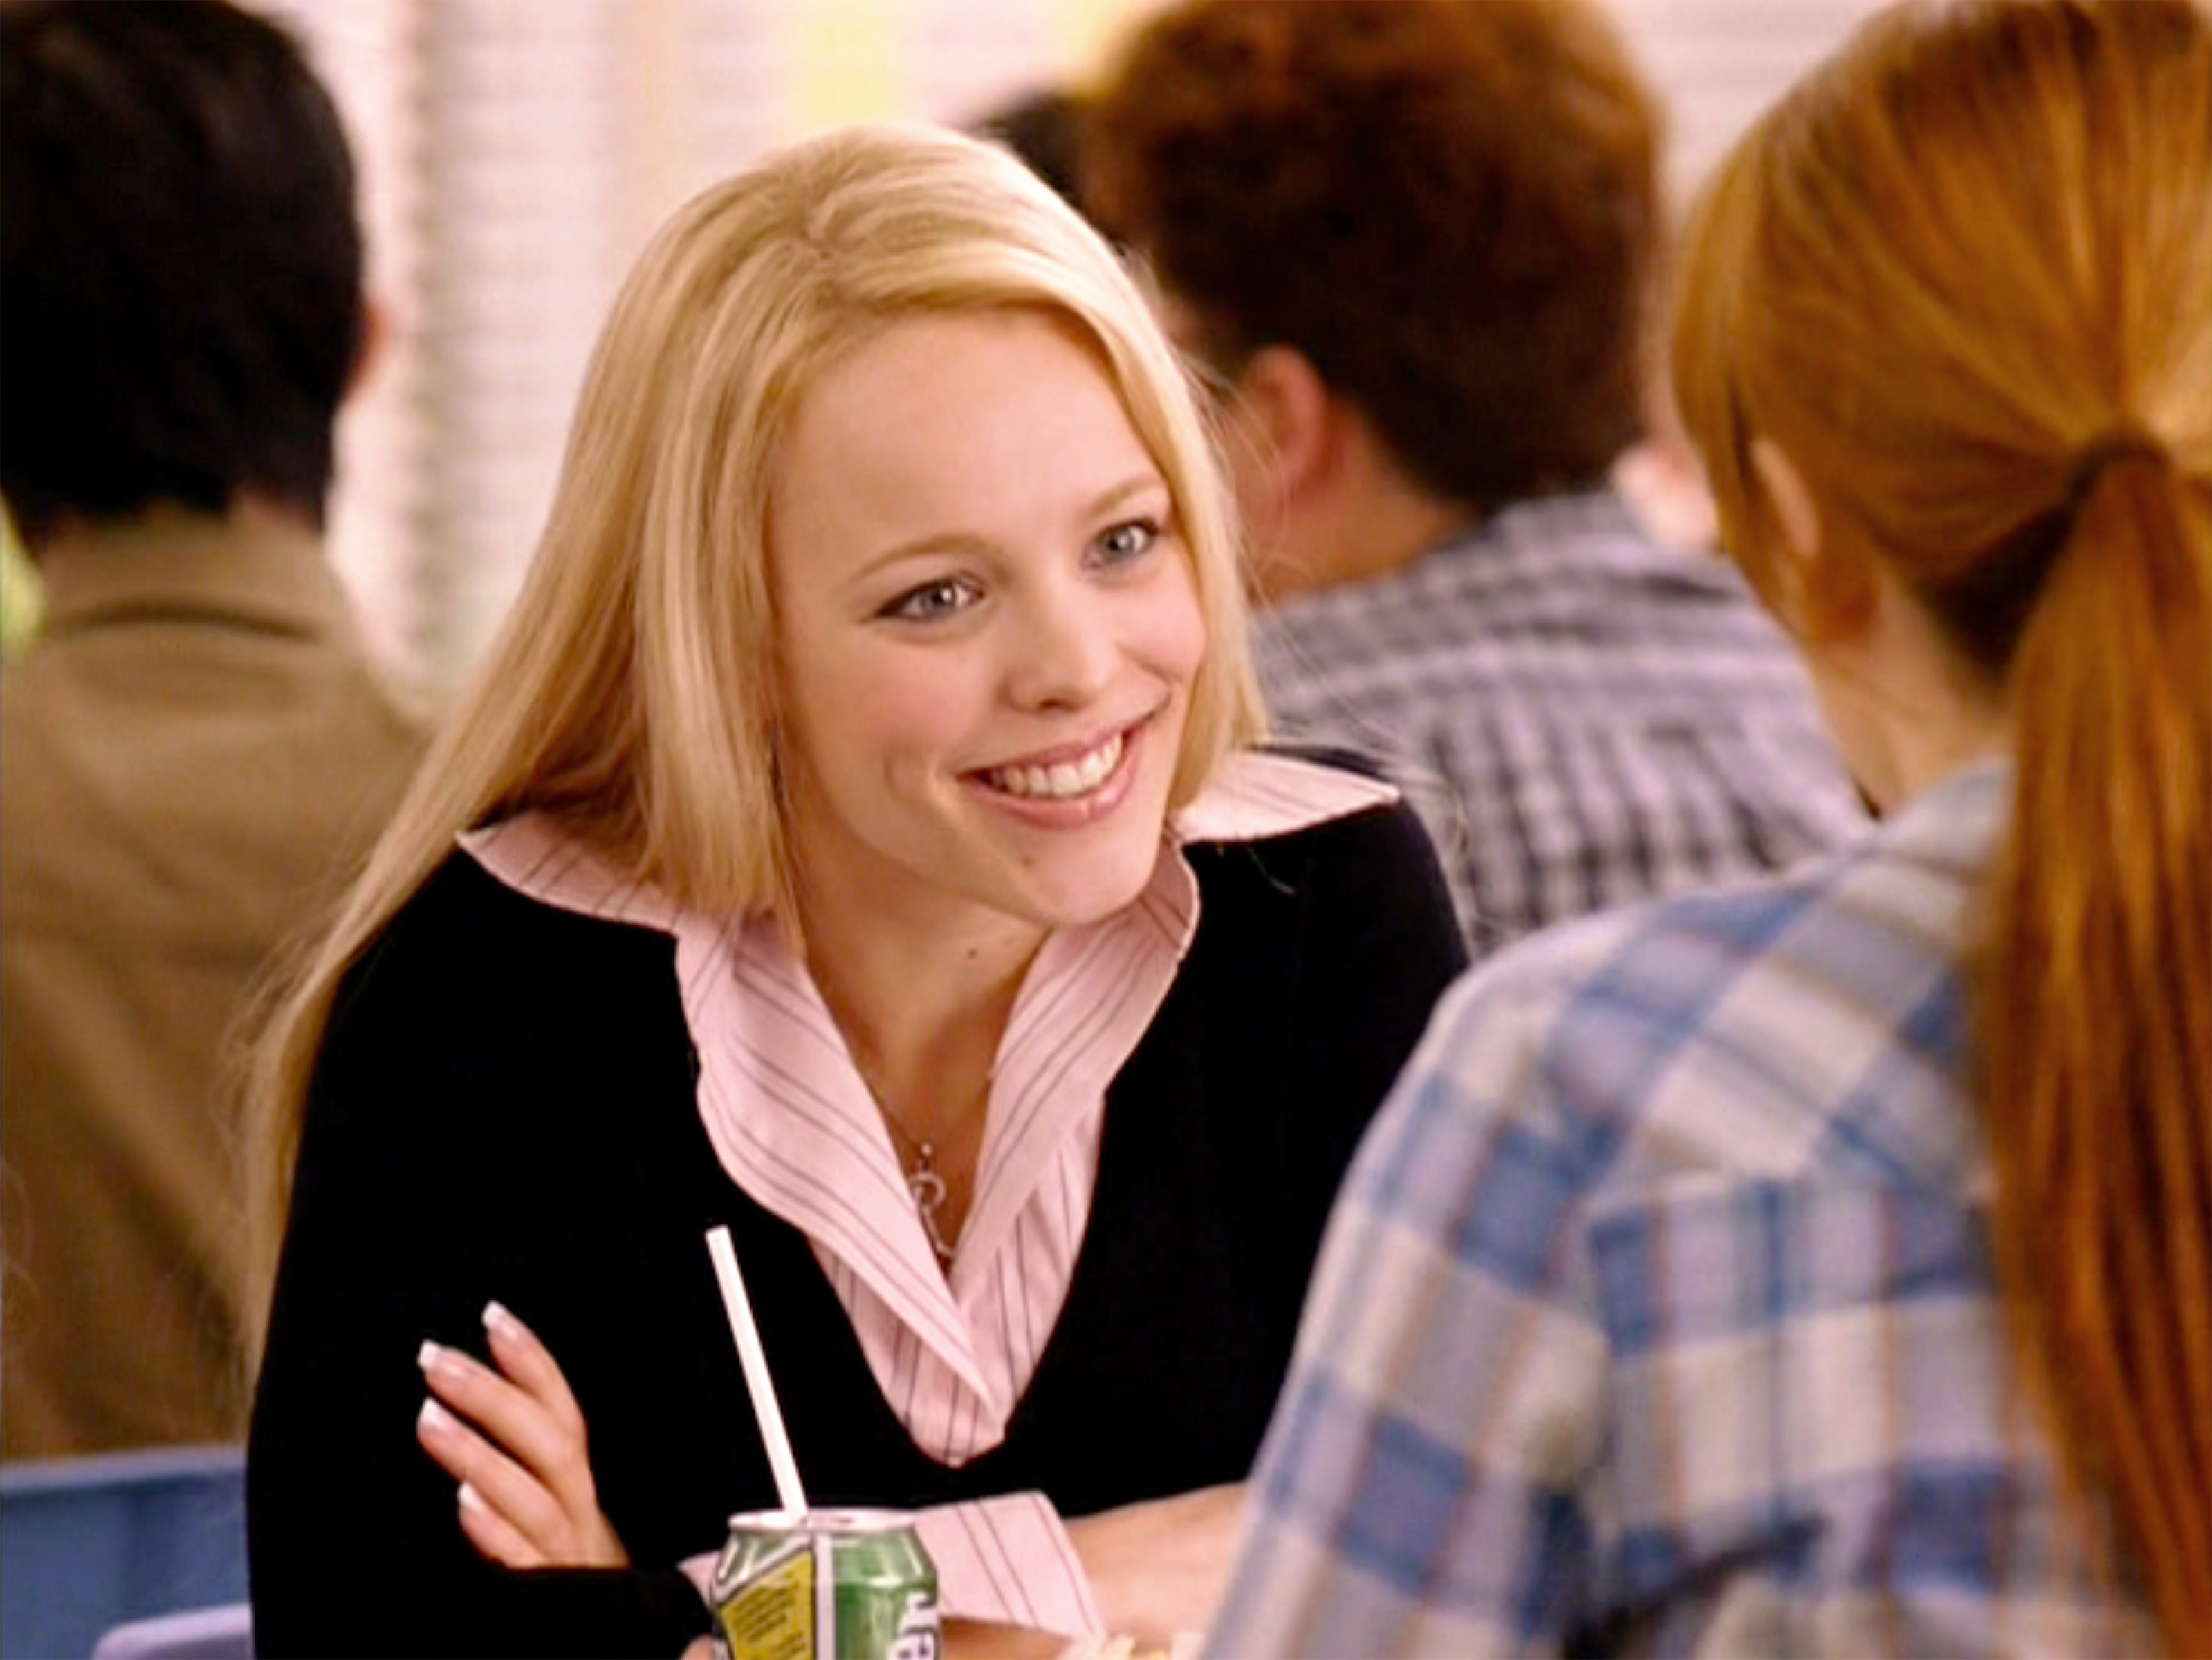 Rachel McAdams as Regina George smiling in a scene from &quot;Mean Girls&quot;